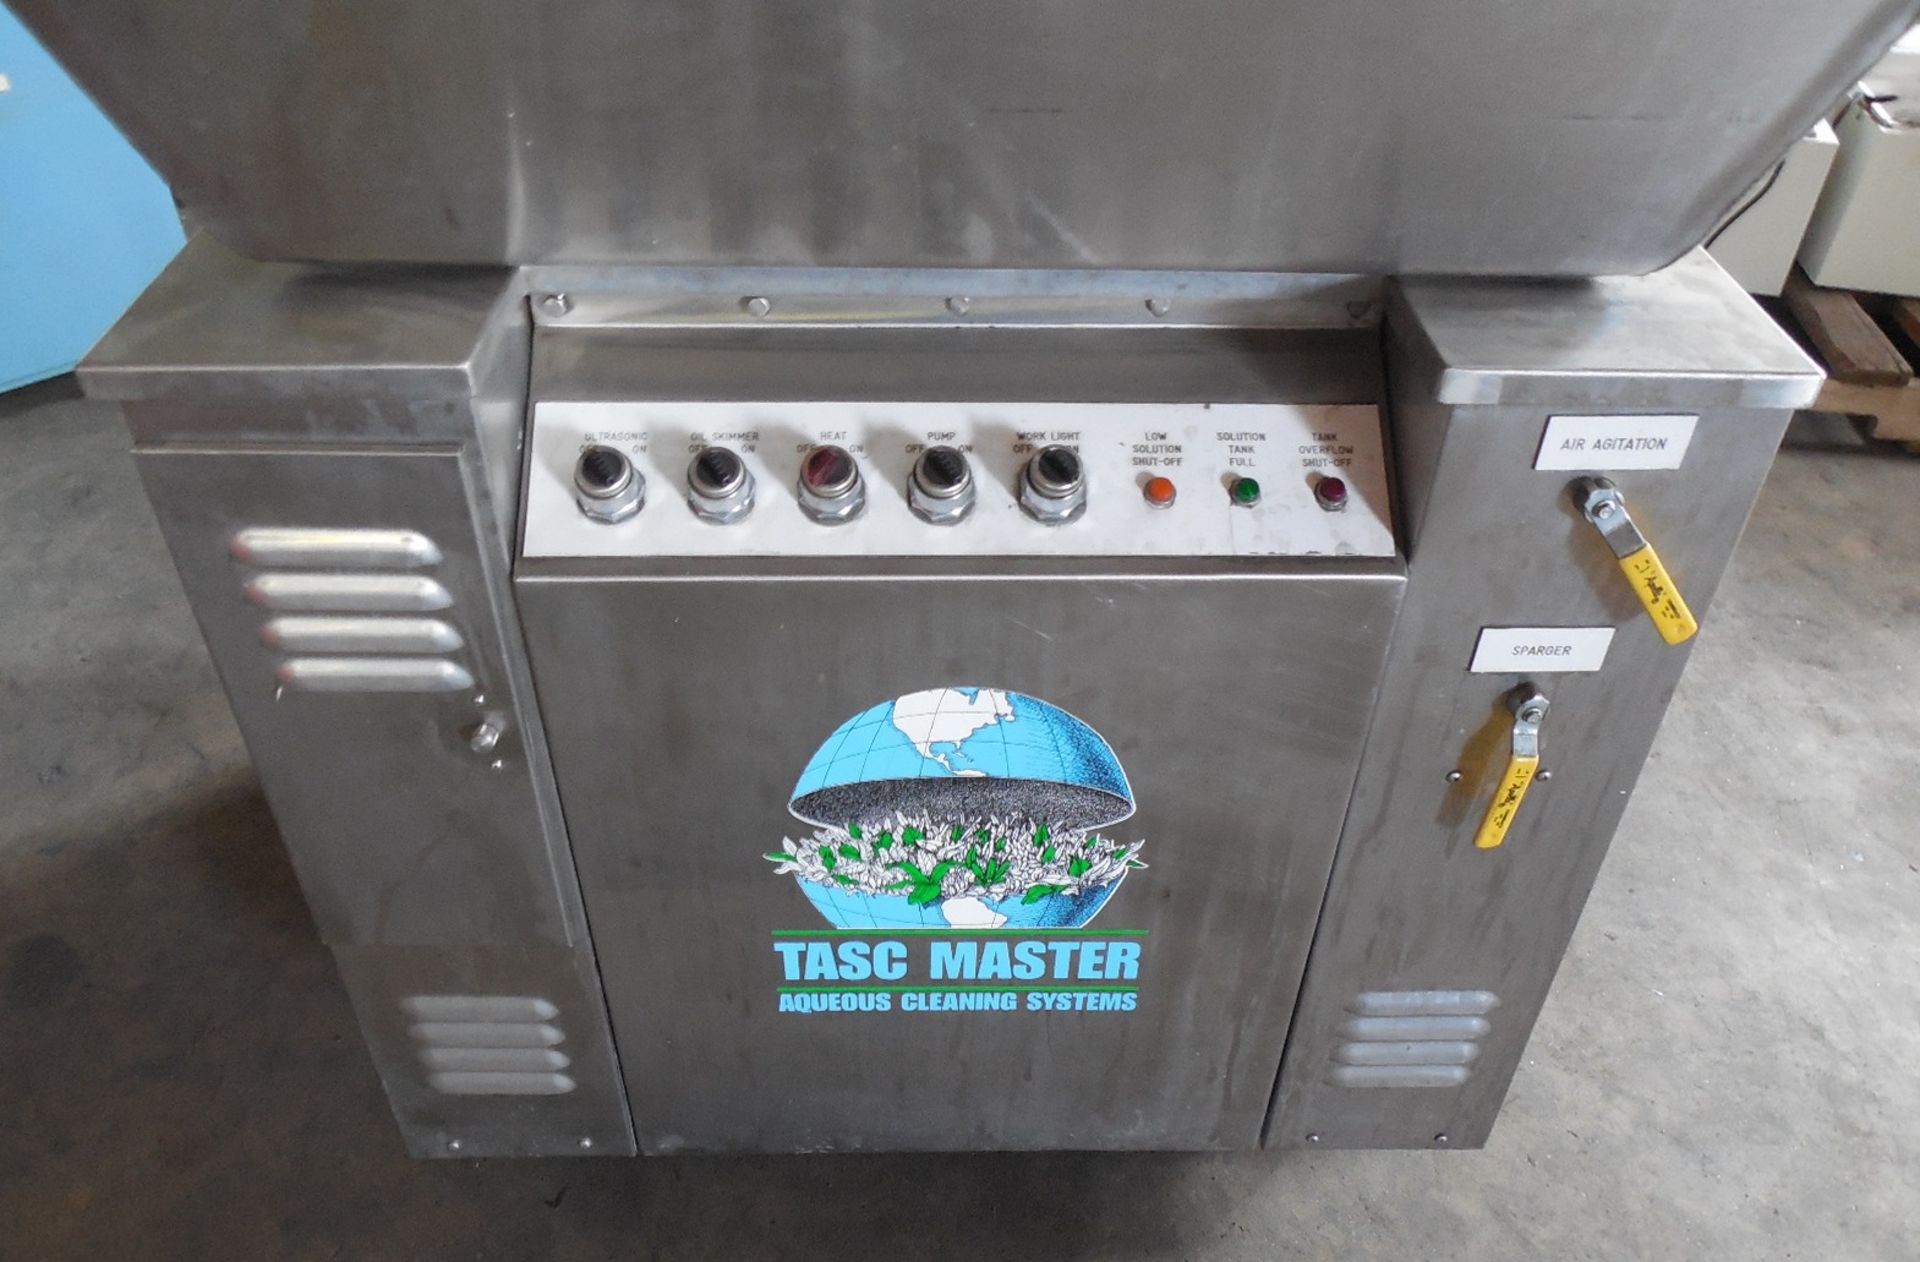 TASC MASTER AQUEOUS CLEANING SYSTEM w/ 27" x 36" x 9" Heated Tank - Image 2 of 4